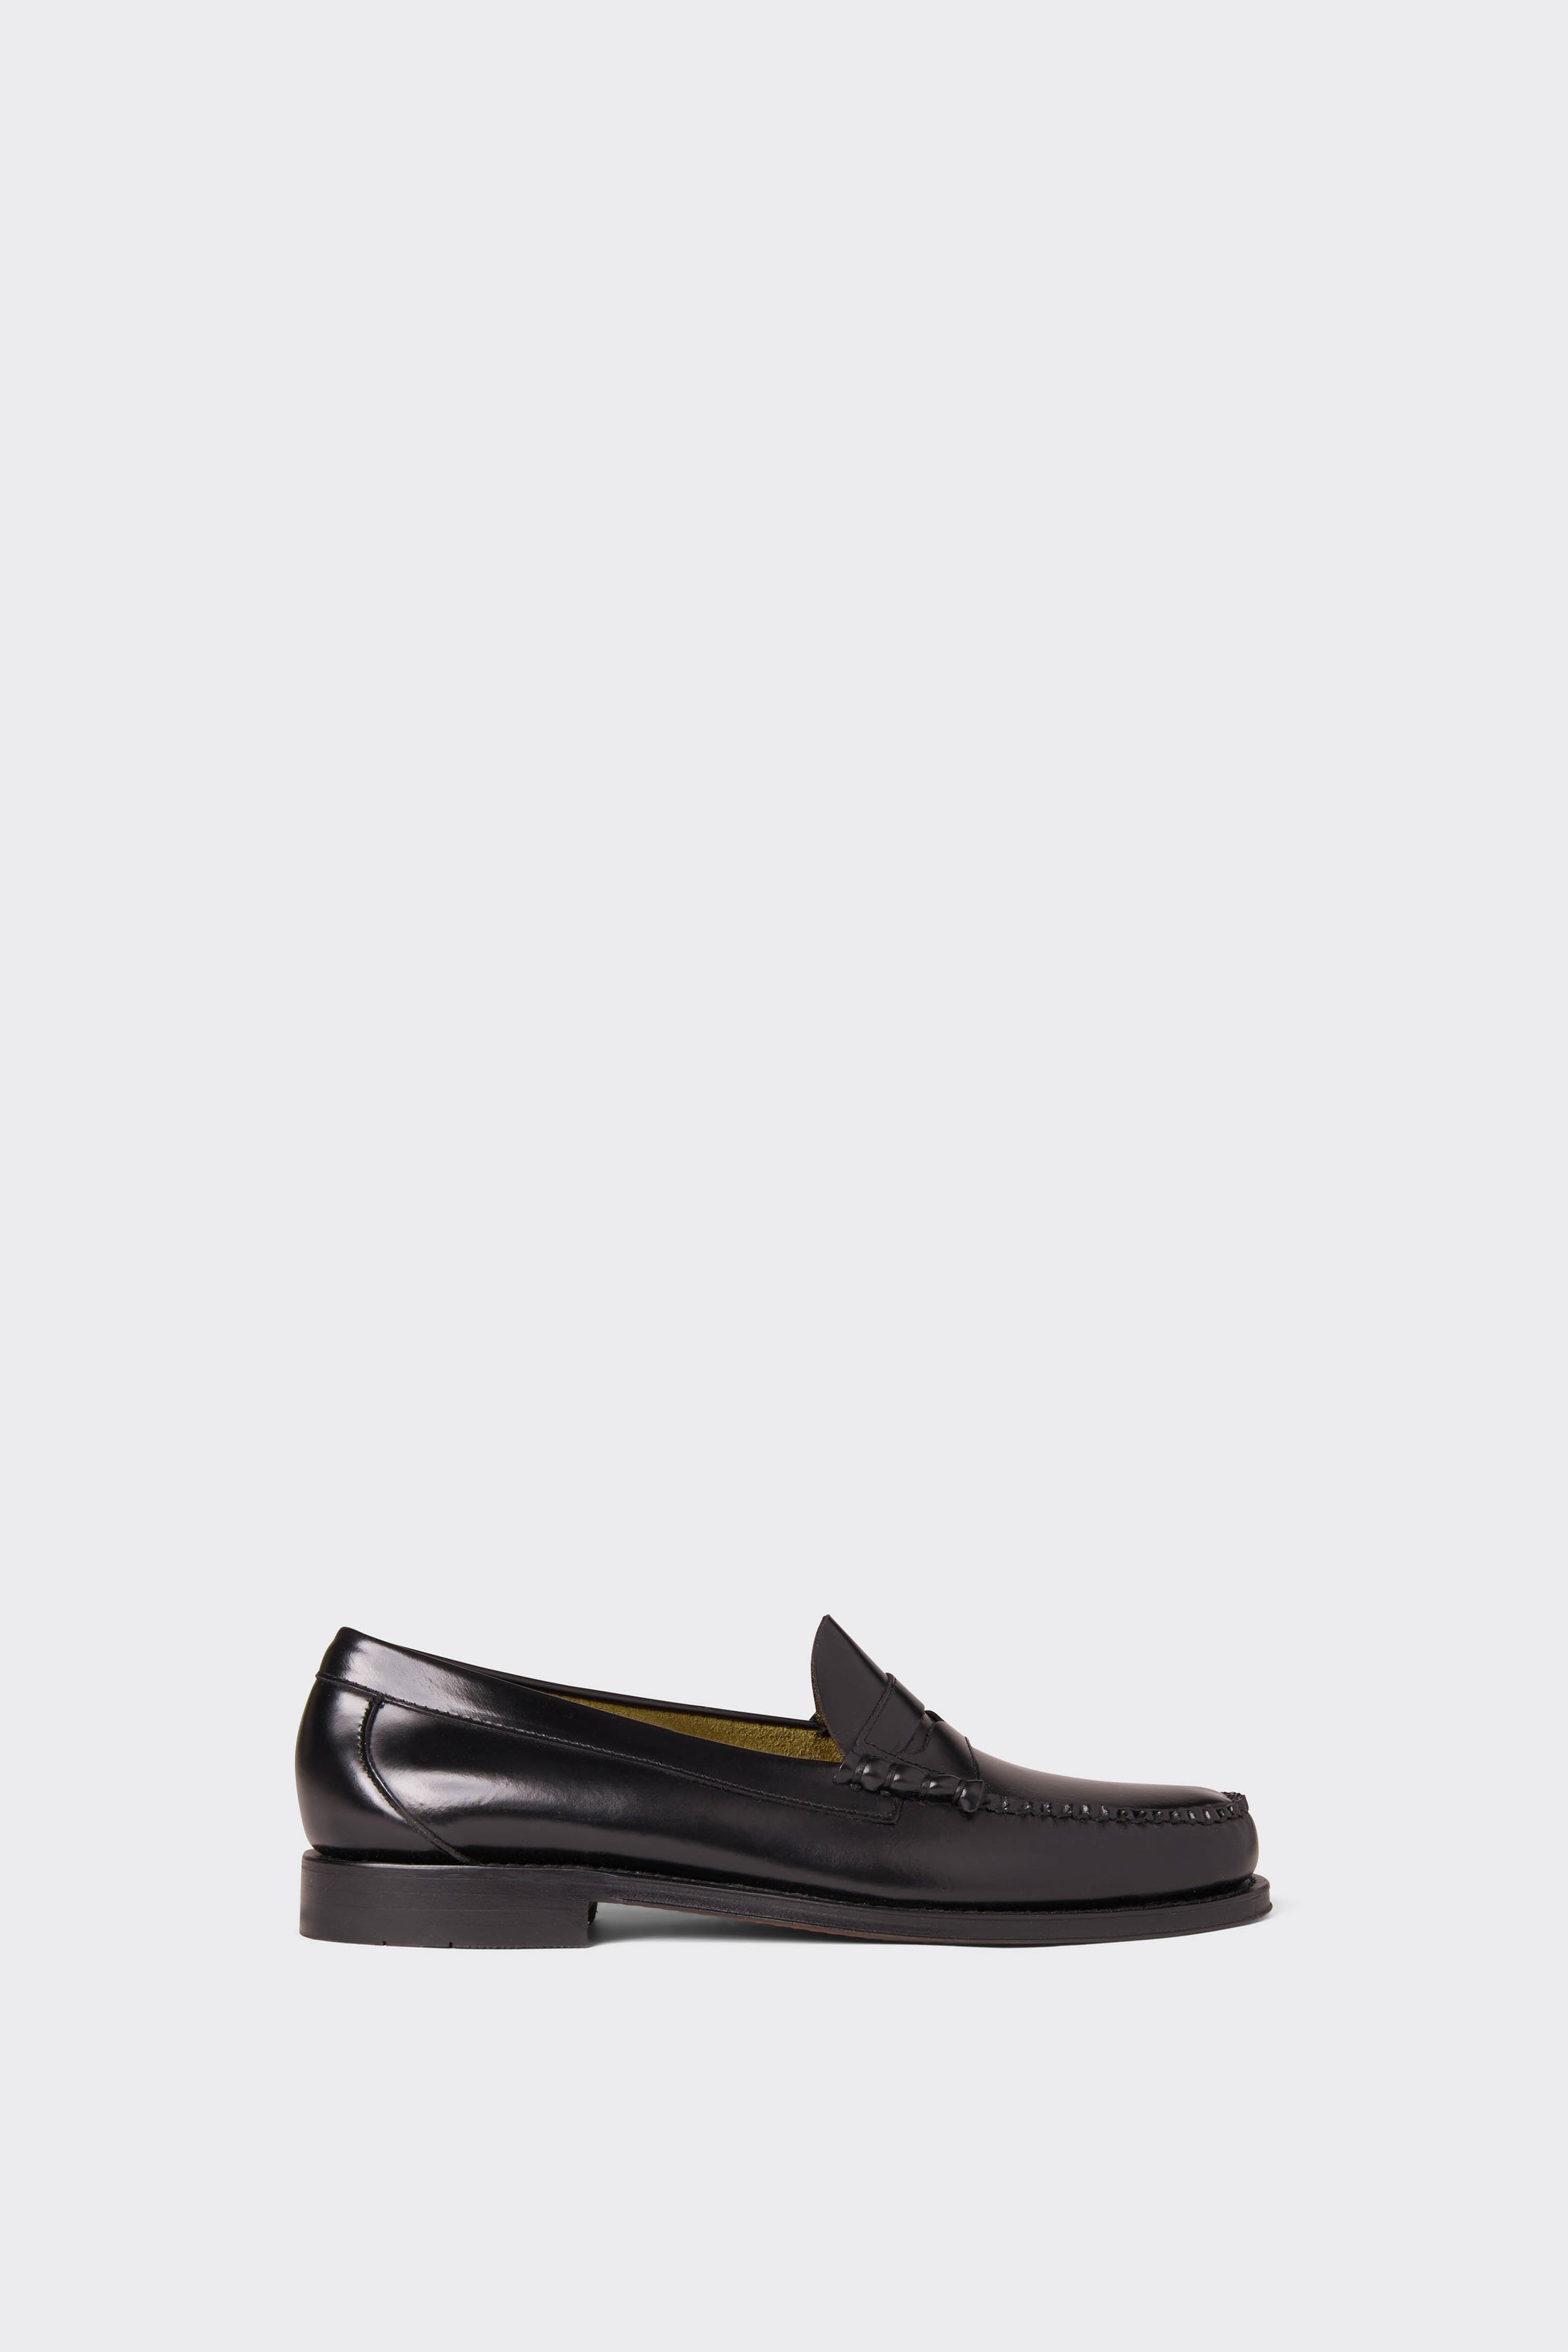 Easy Weejuns Larson Penny Loafers Black Leather